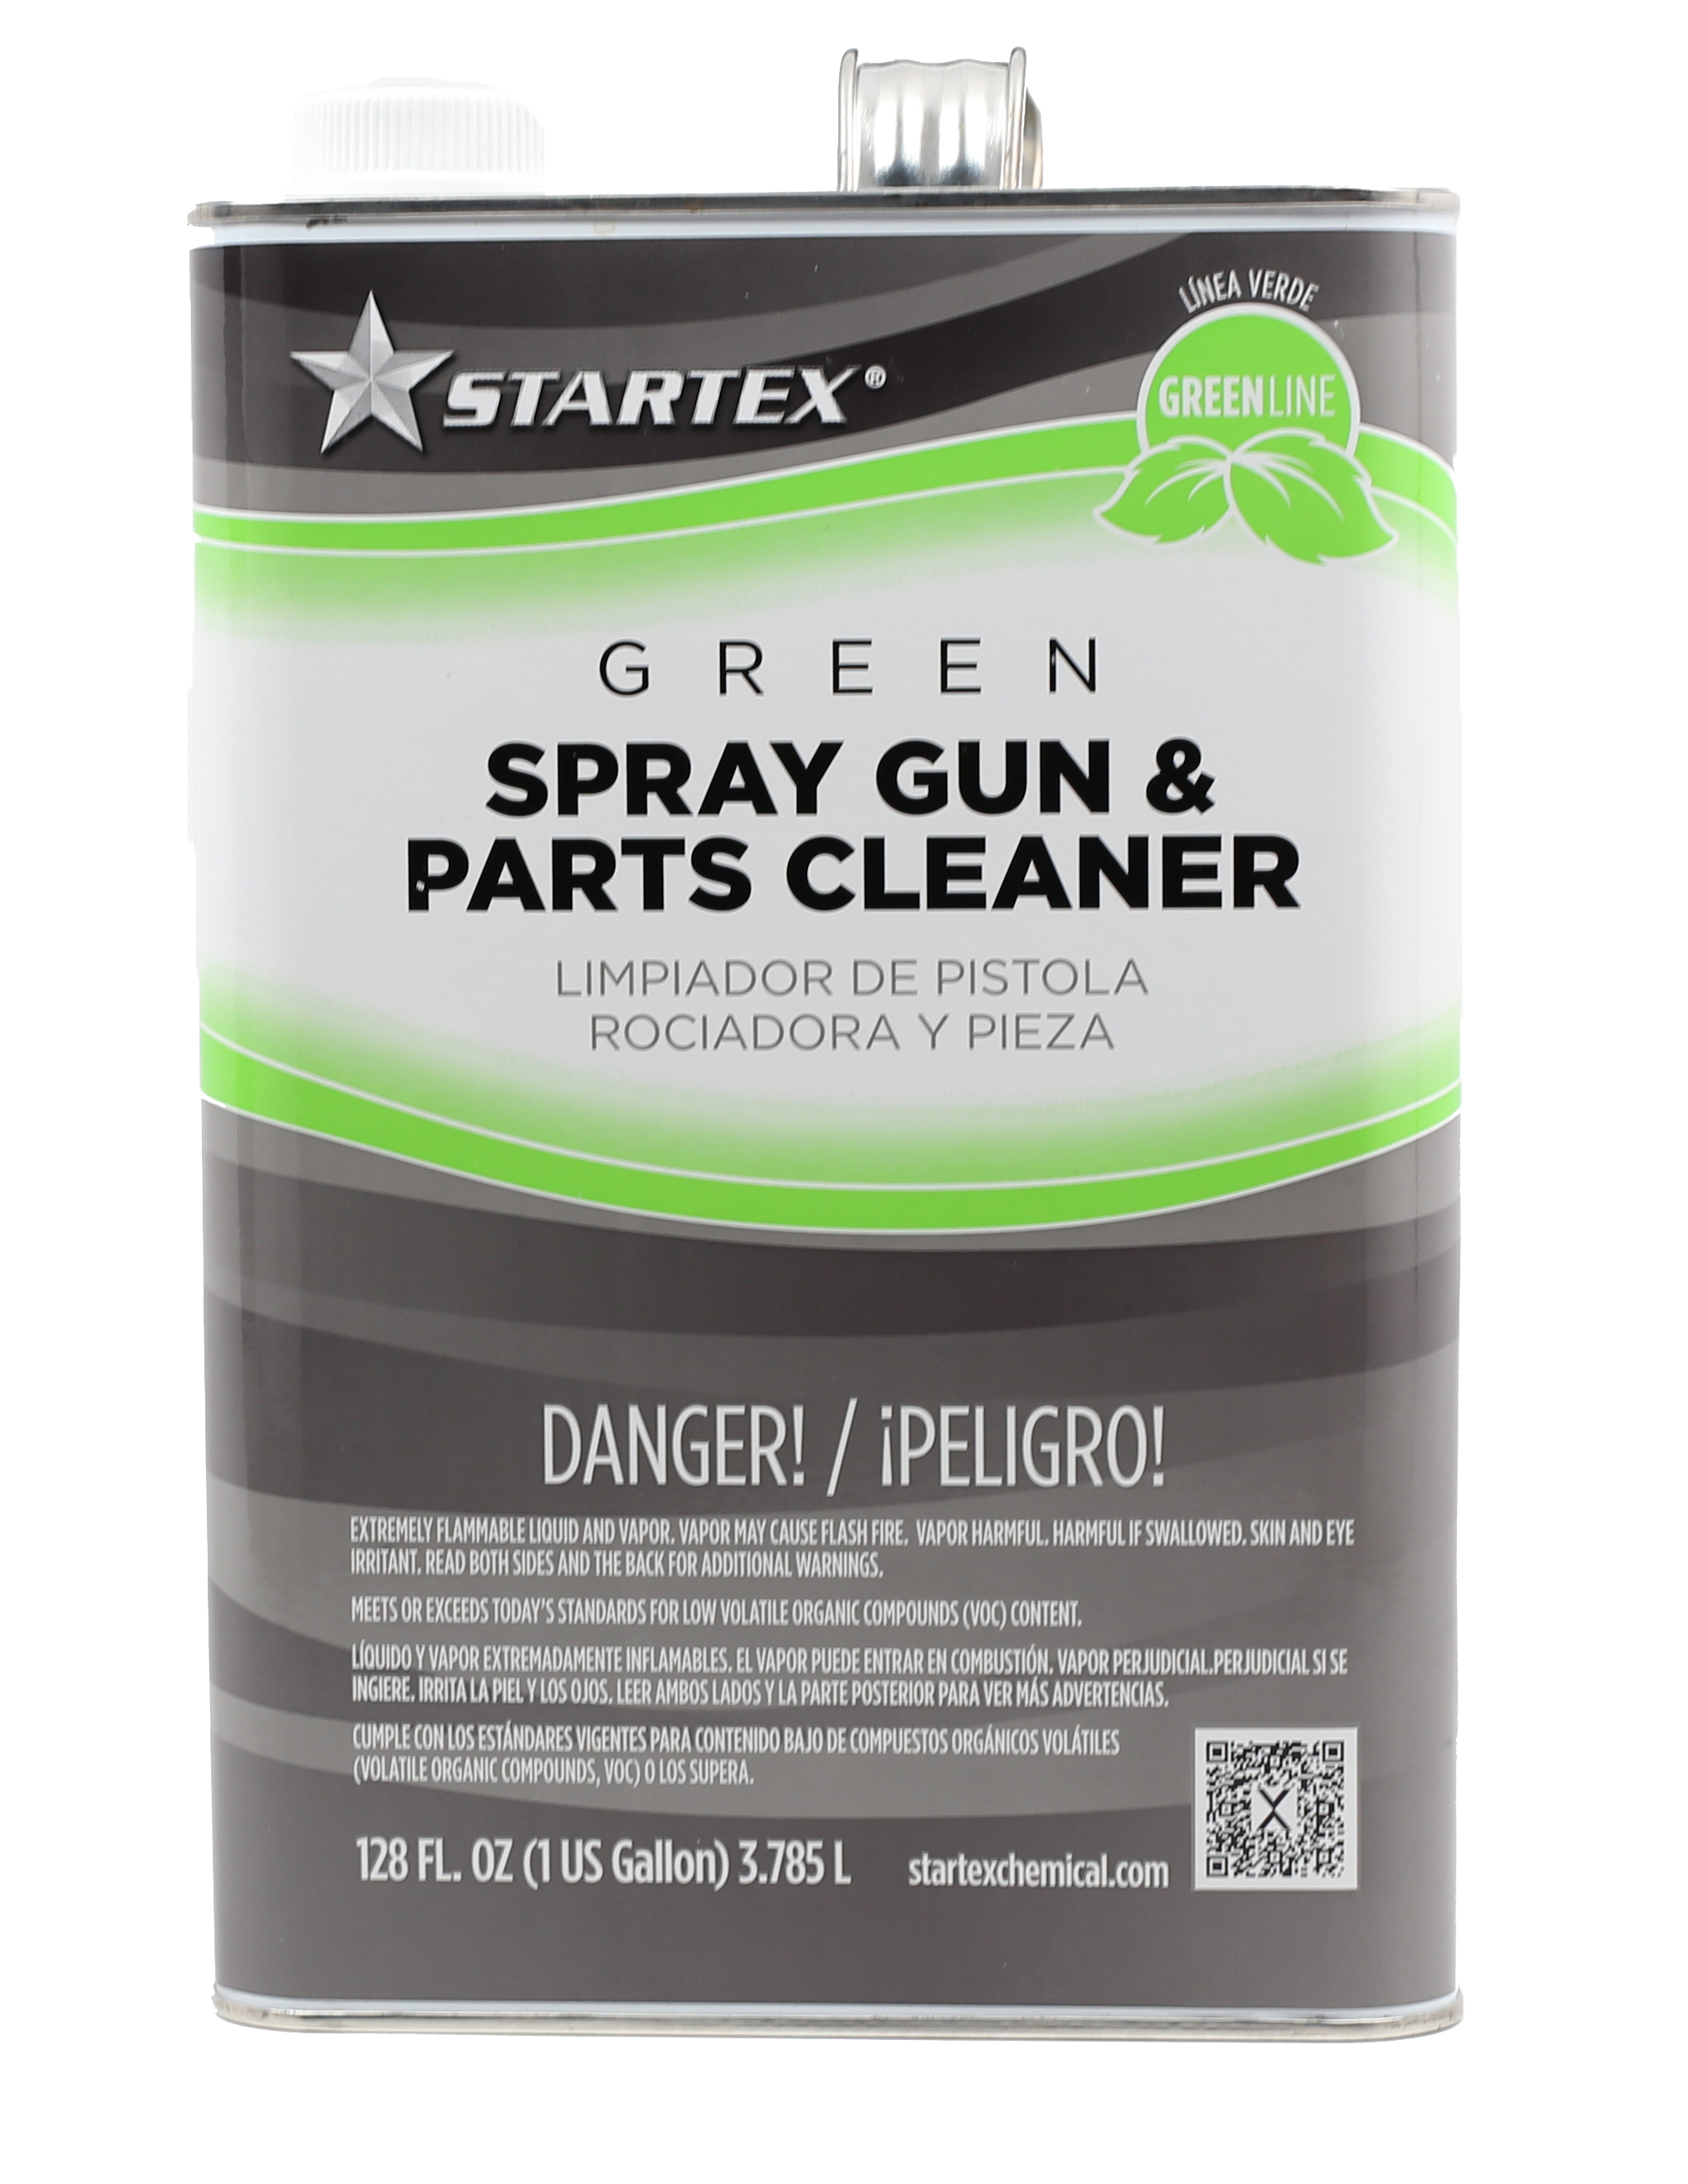 one gallon green spray gun parts and cleaner for paint application